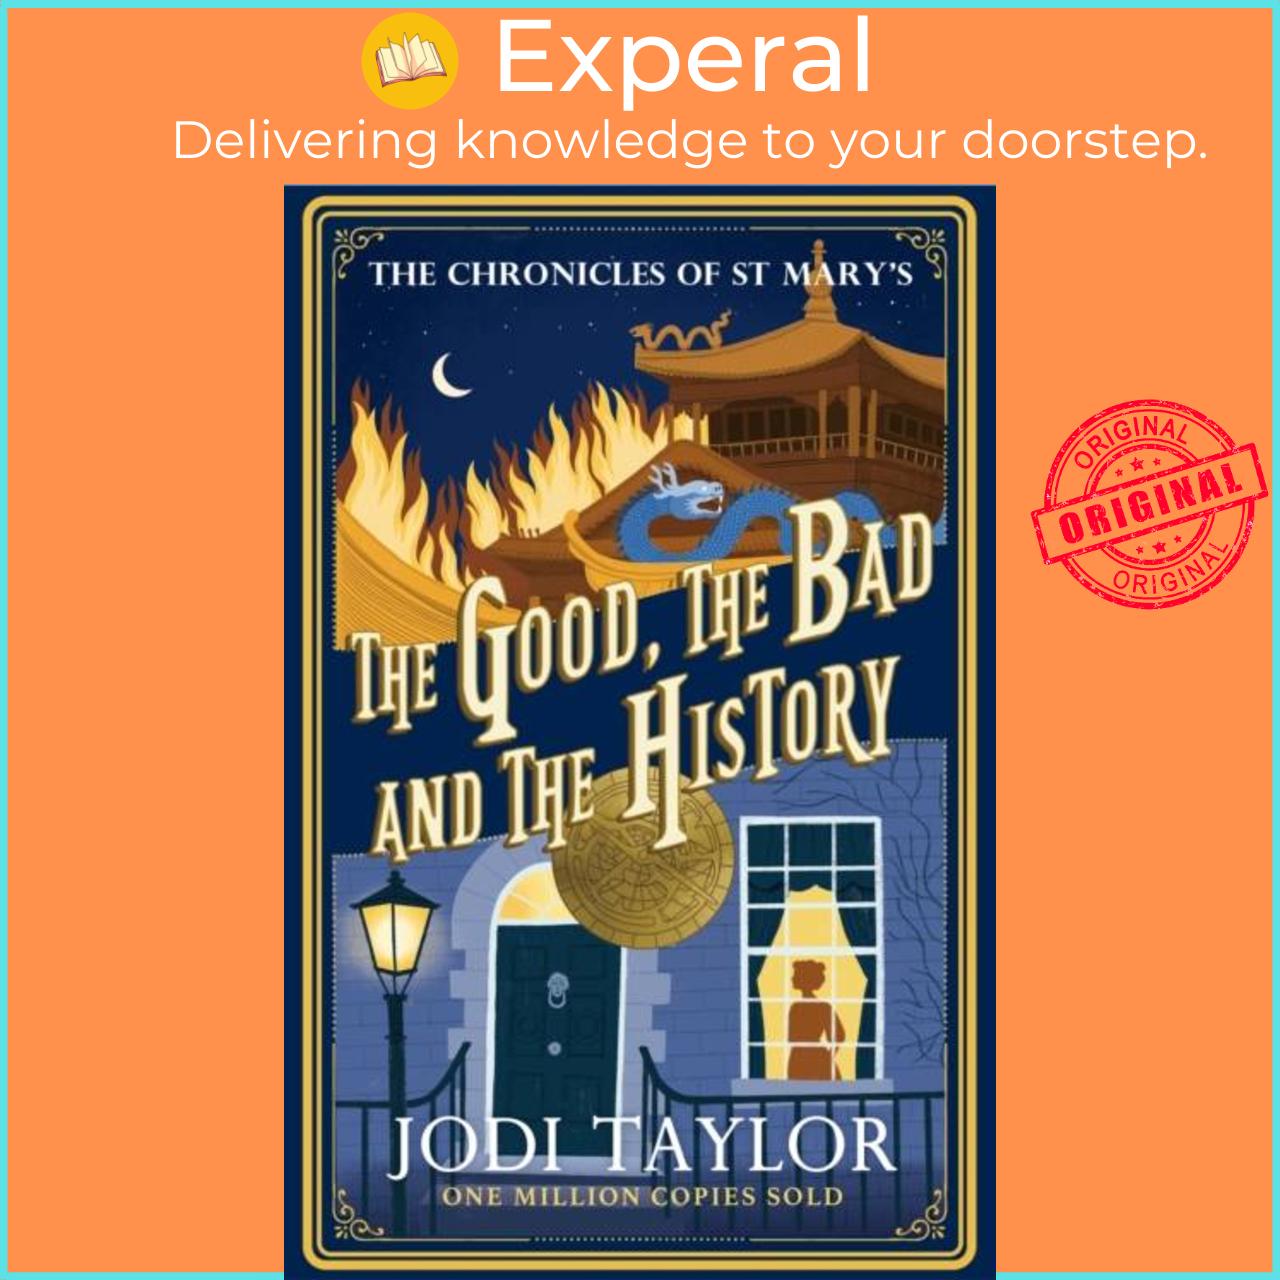 Sách - The Good, The Bad and The History by Jodi Taylor (UK edition, paperback)